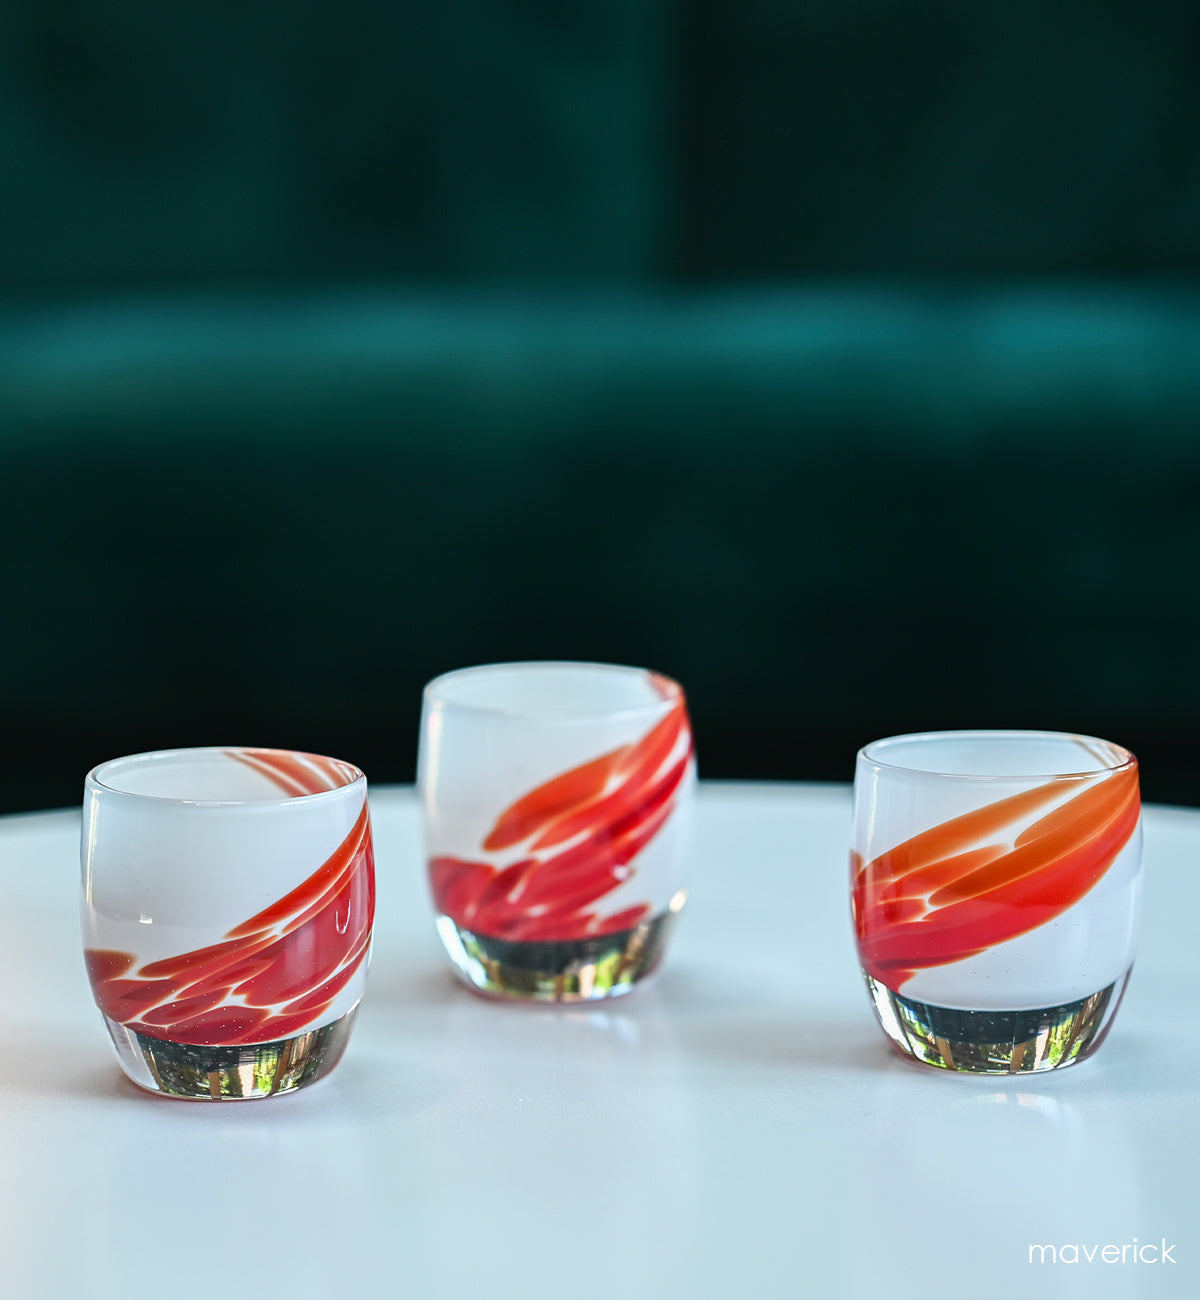 maverick white with red wing, hand-blown glass votive candle holders. 